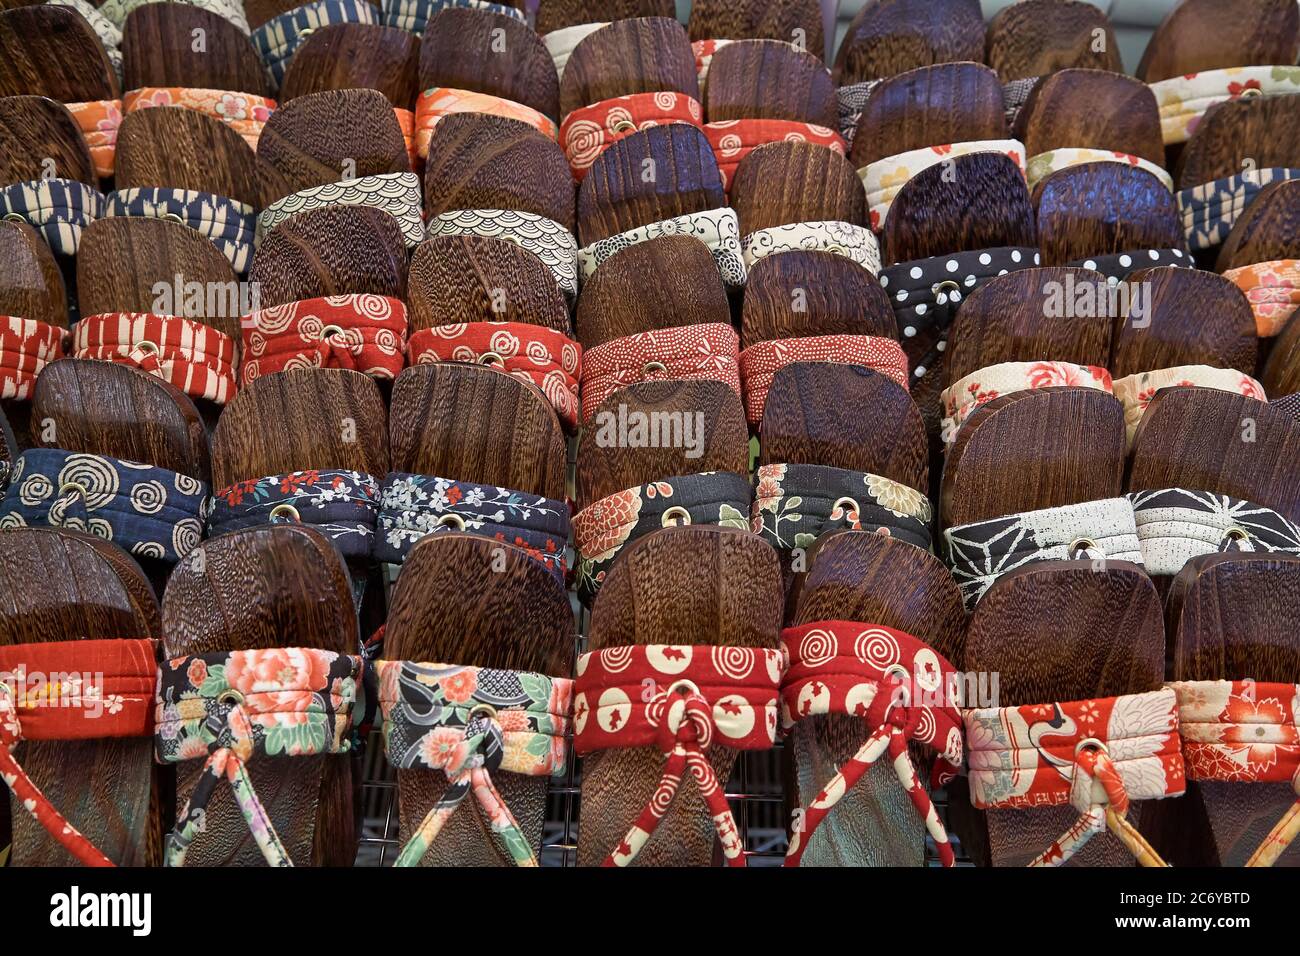 KYOTO, JAPAN - OCTOBER 22, 2007: The colorful female japanese wooden clogs geta sandals, made of silk, exposed on the counter at the market of Kyoto. Stock Photo